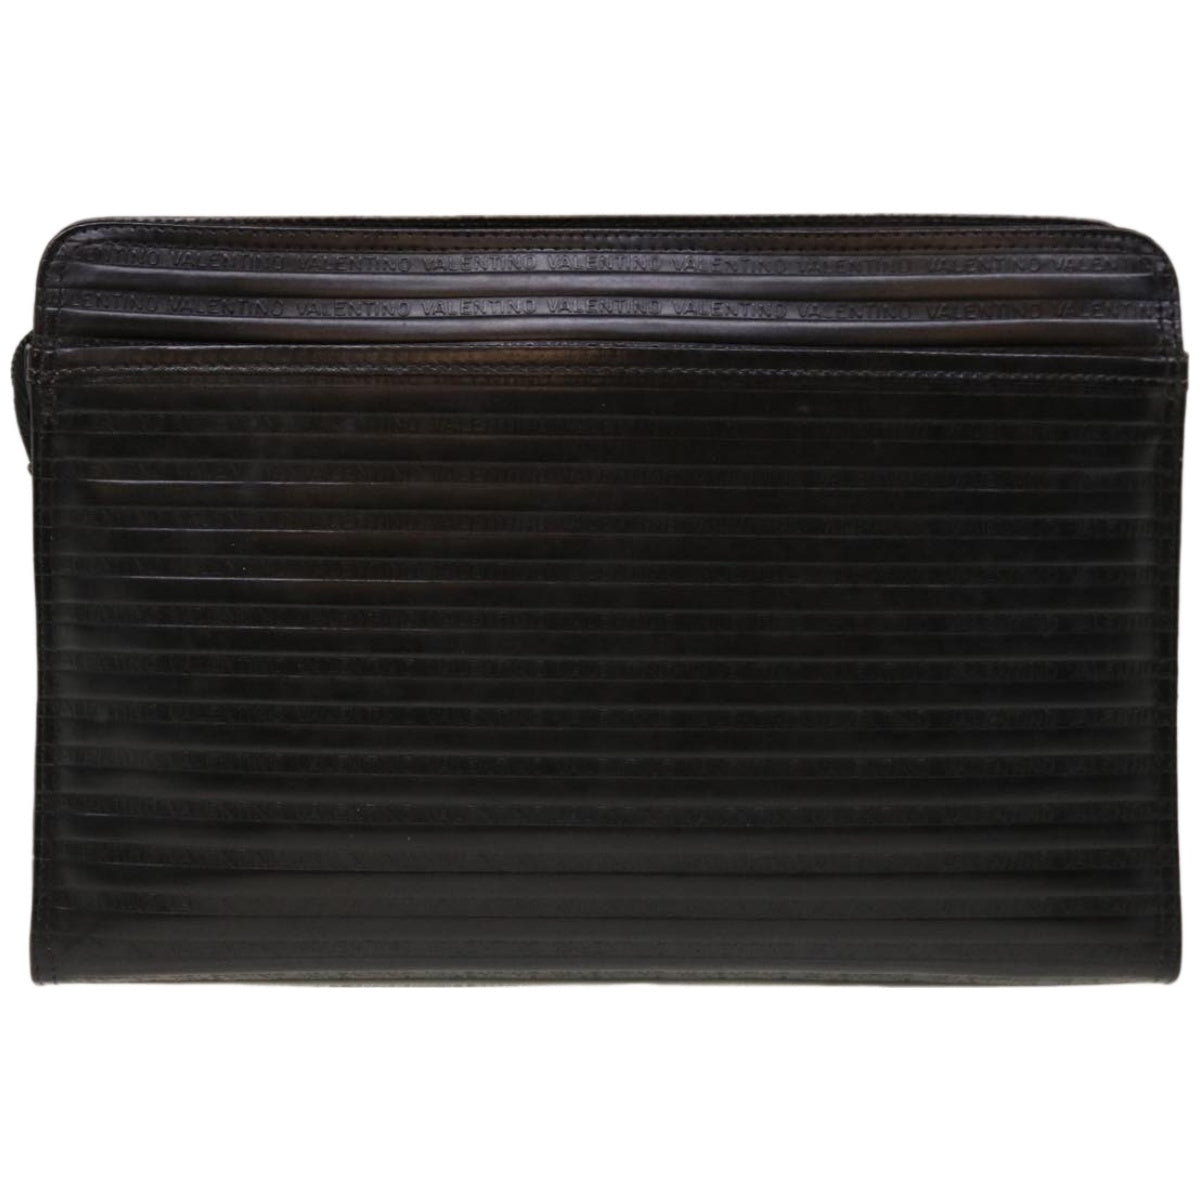 VALENTINO Clutch Bag Leather Black Auth 65385 - 0